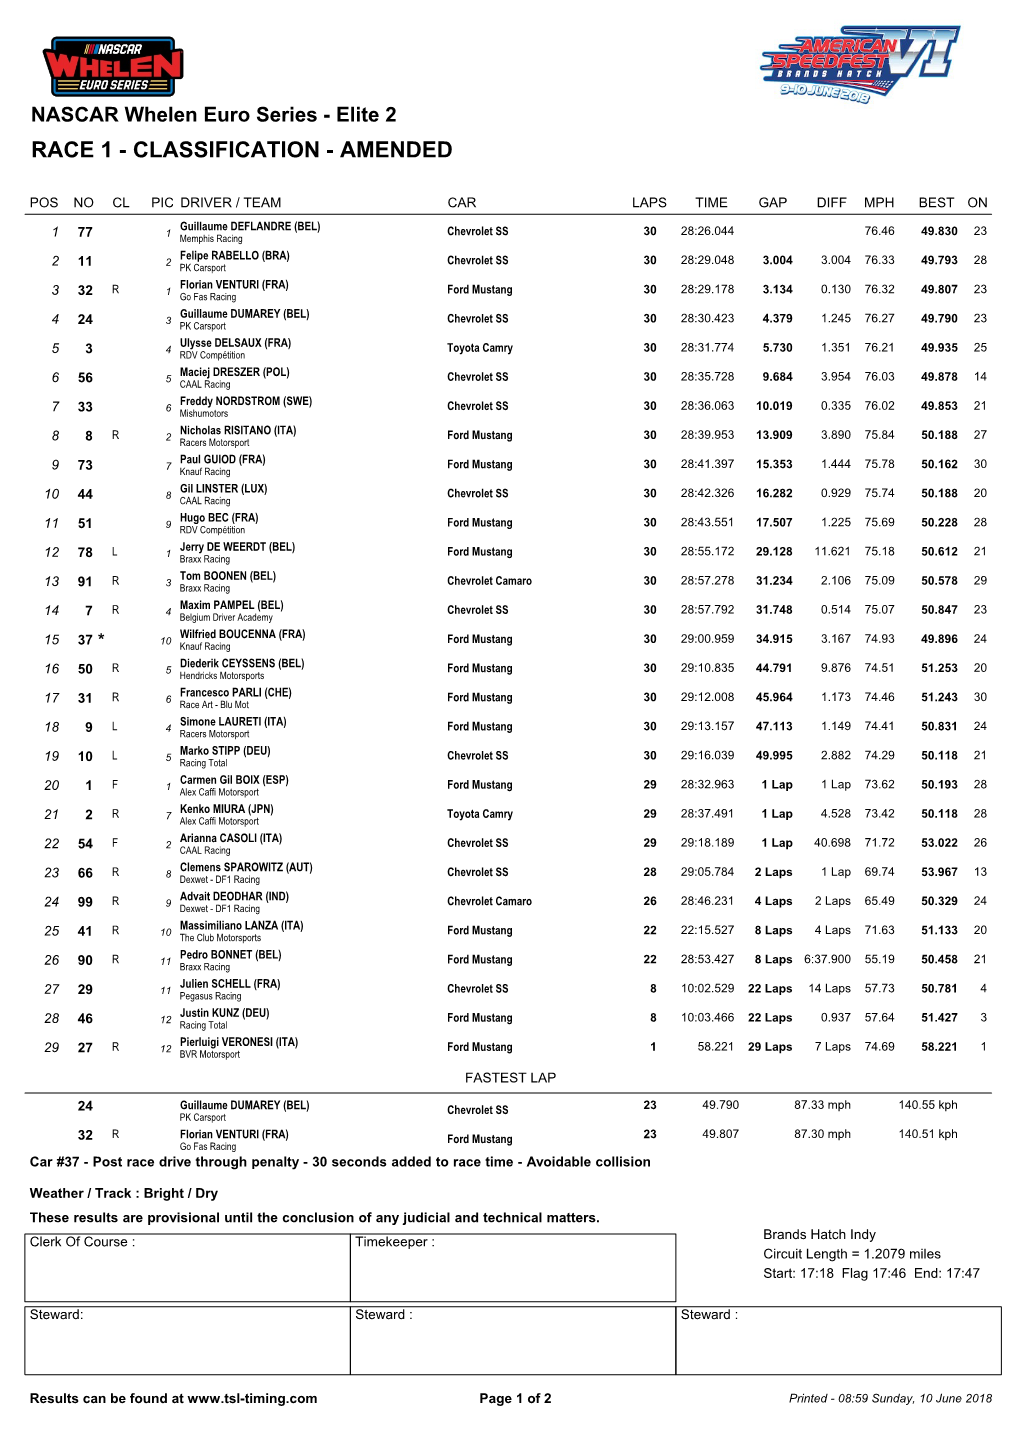 Race 1 - Classification - Amended